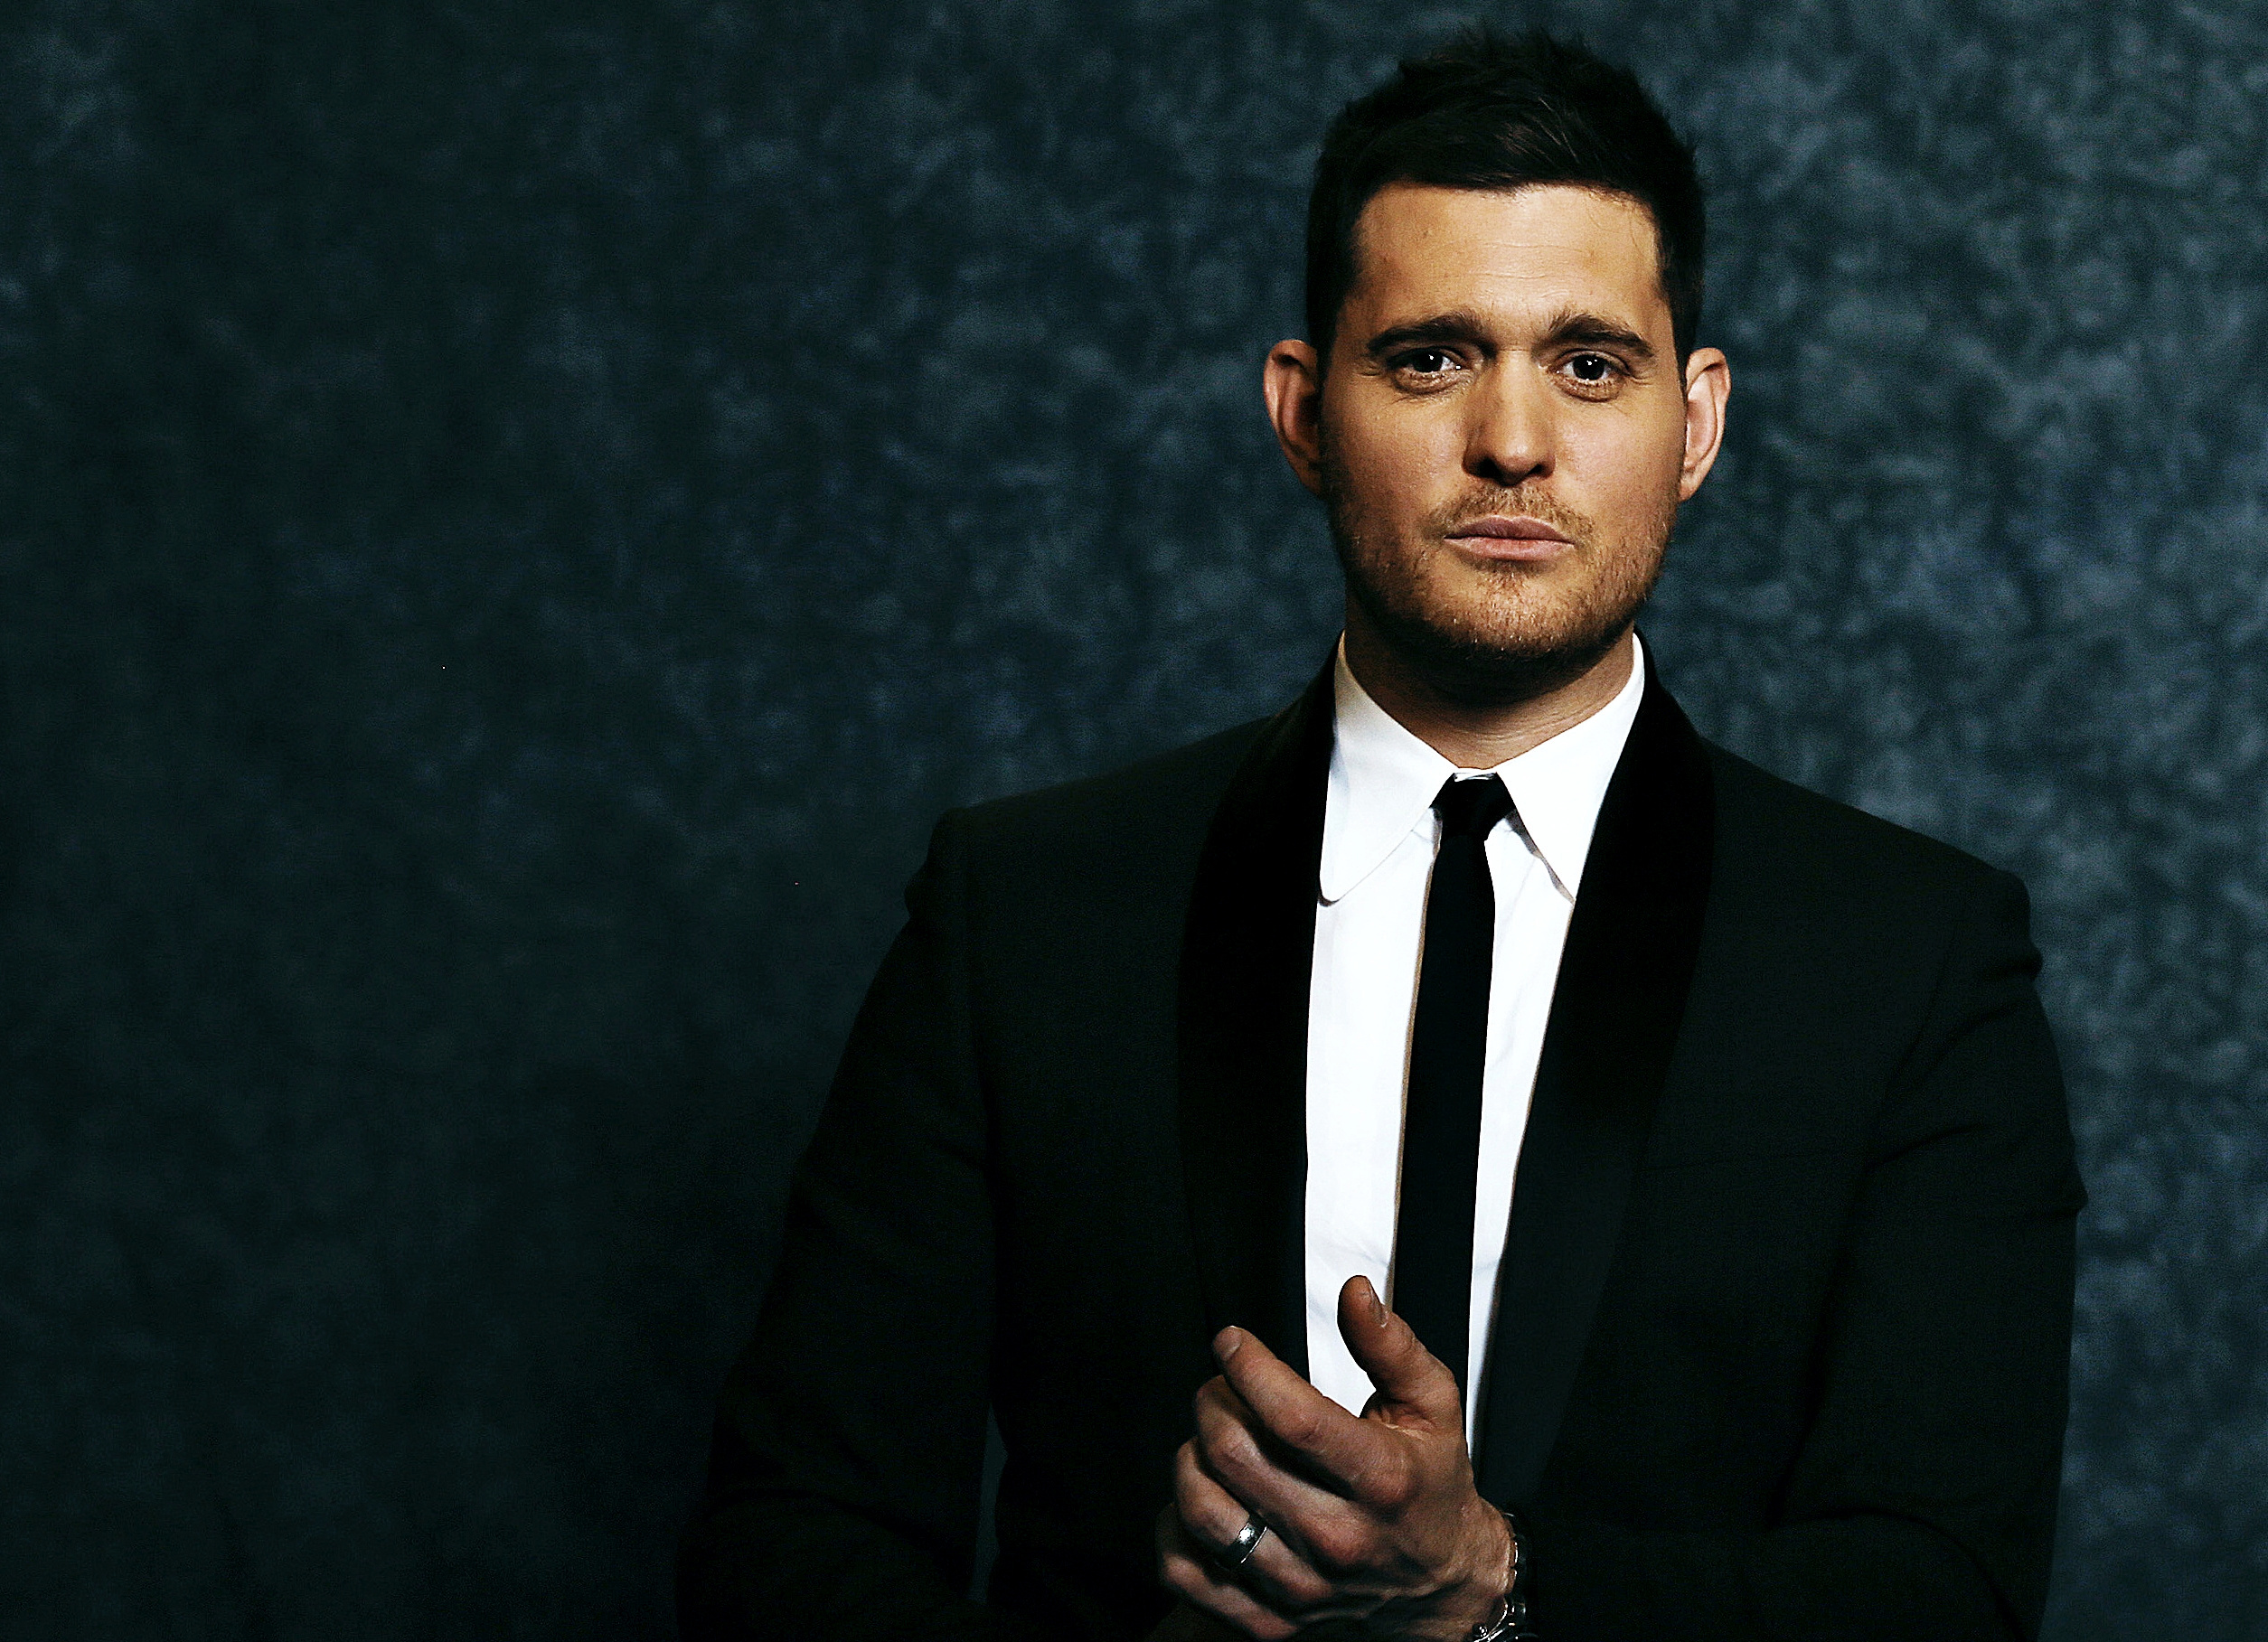 Michael Buble music collection, Smooth vocals, Crooner style, Pop standards, 2510x1820 HD Desktop